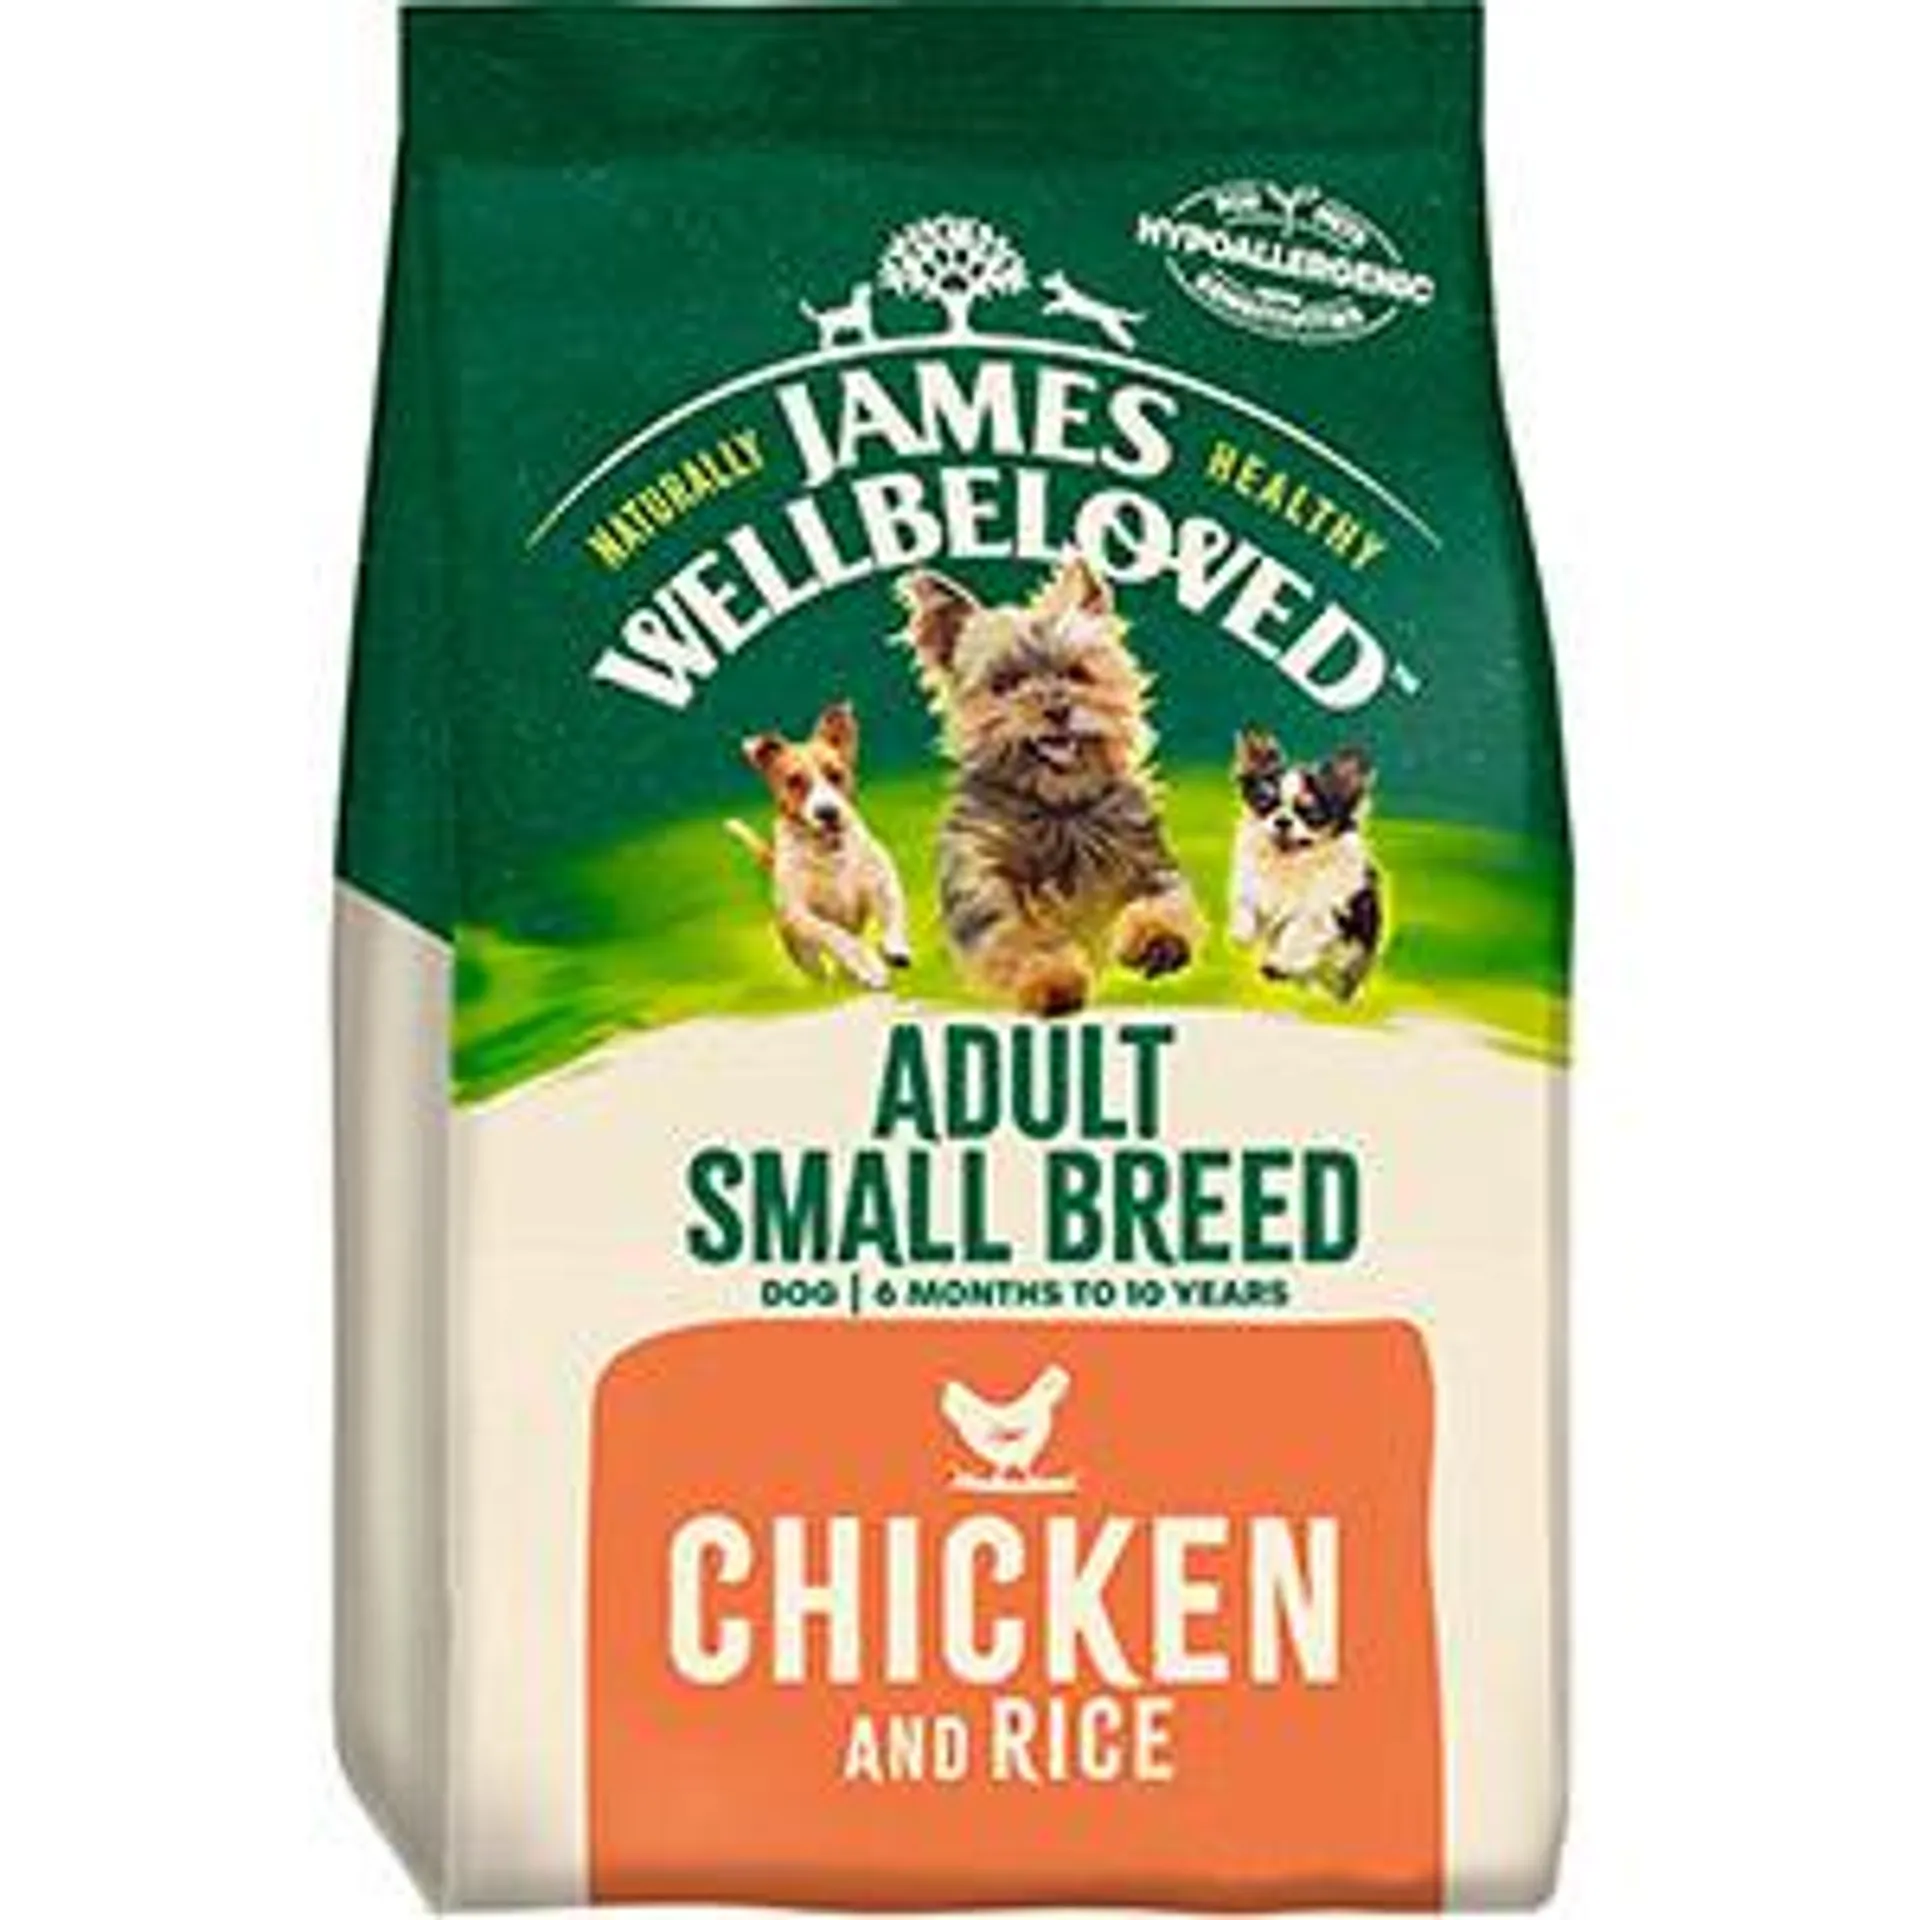 James Wellbeloved Small Breed Dry Adult Dog Food Chicken and Rice